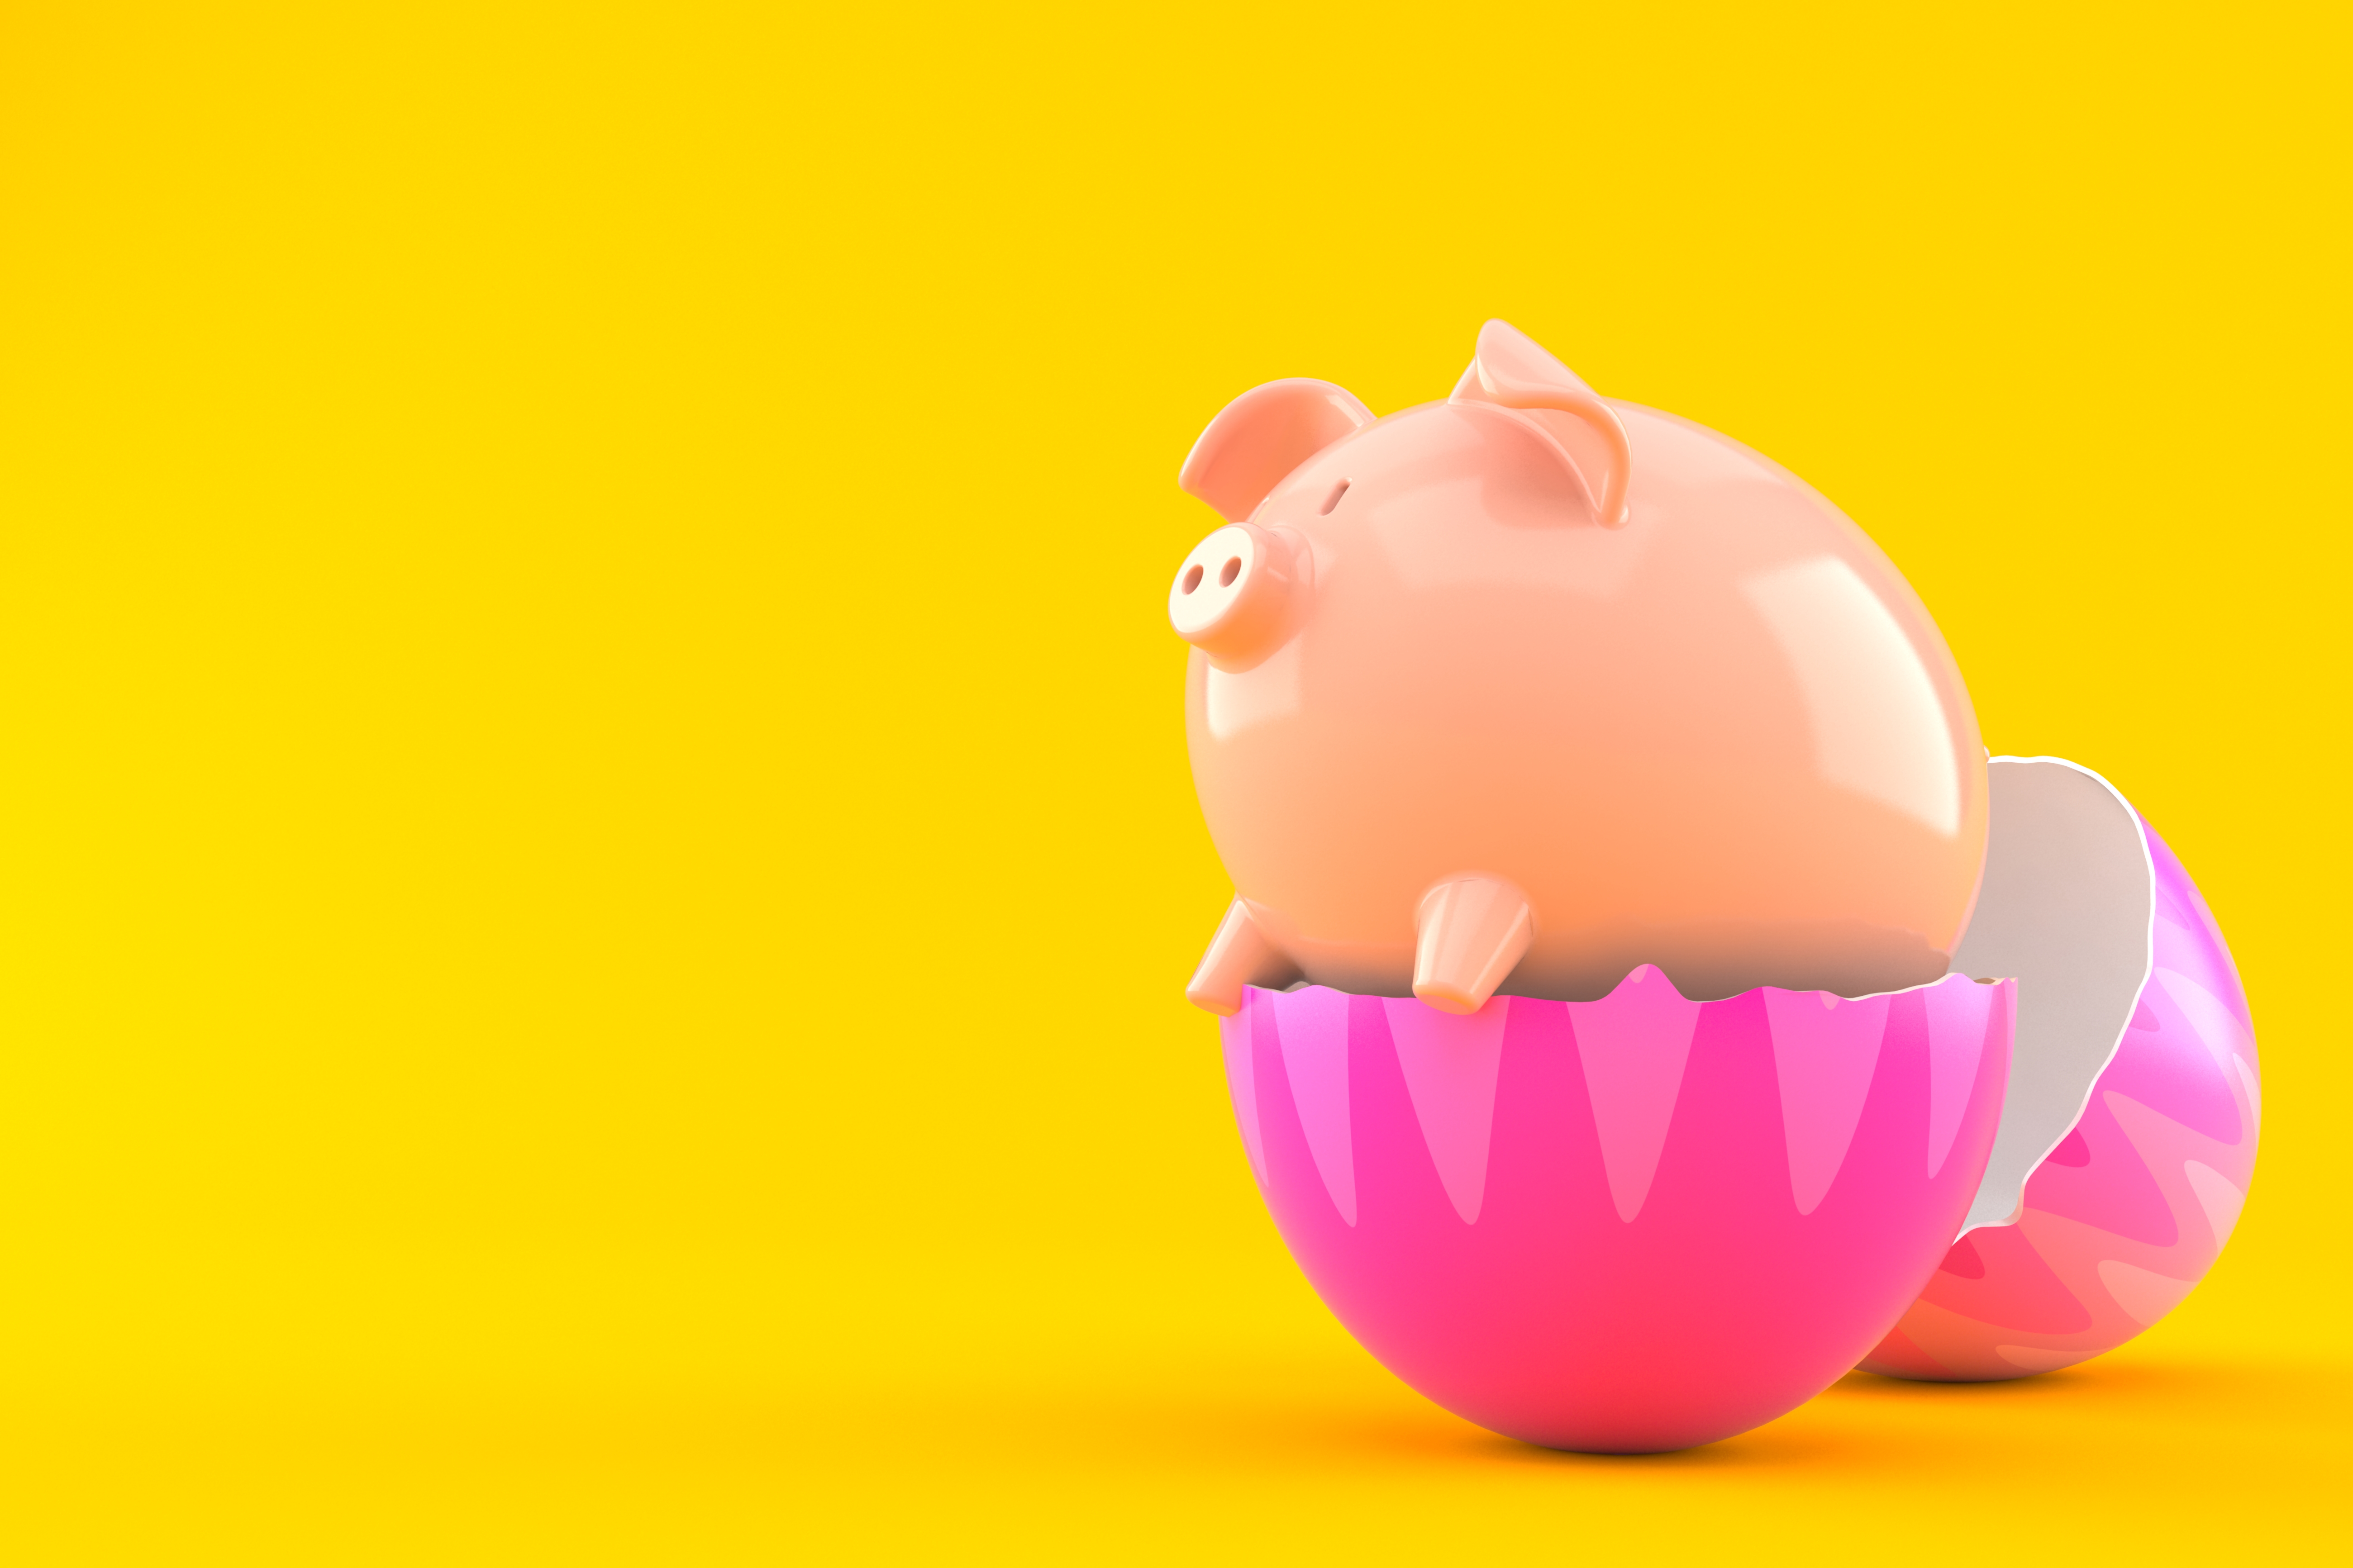 Money-saving expert Natalia Lachim has revealed how you can save £260 in time for Easter with these minimal changes